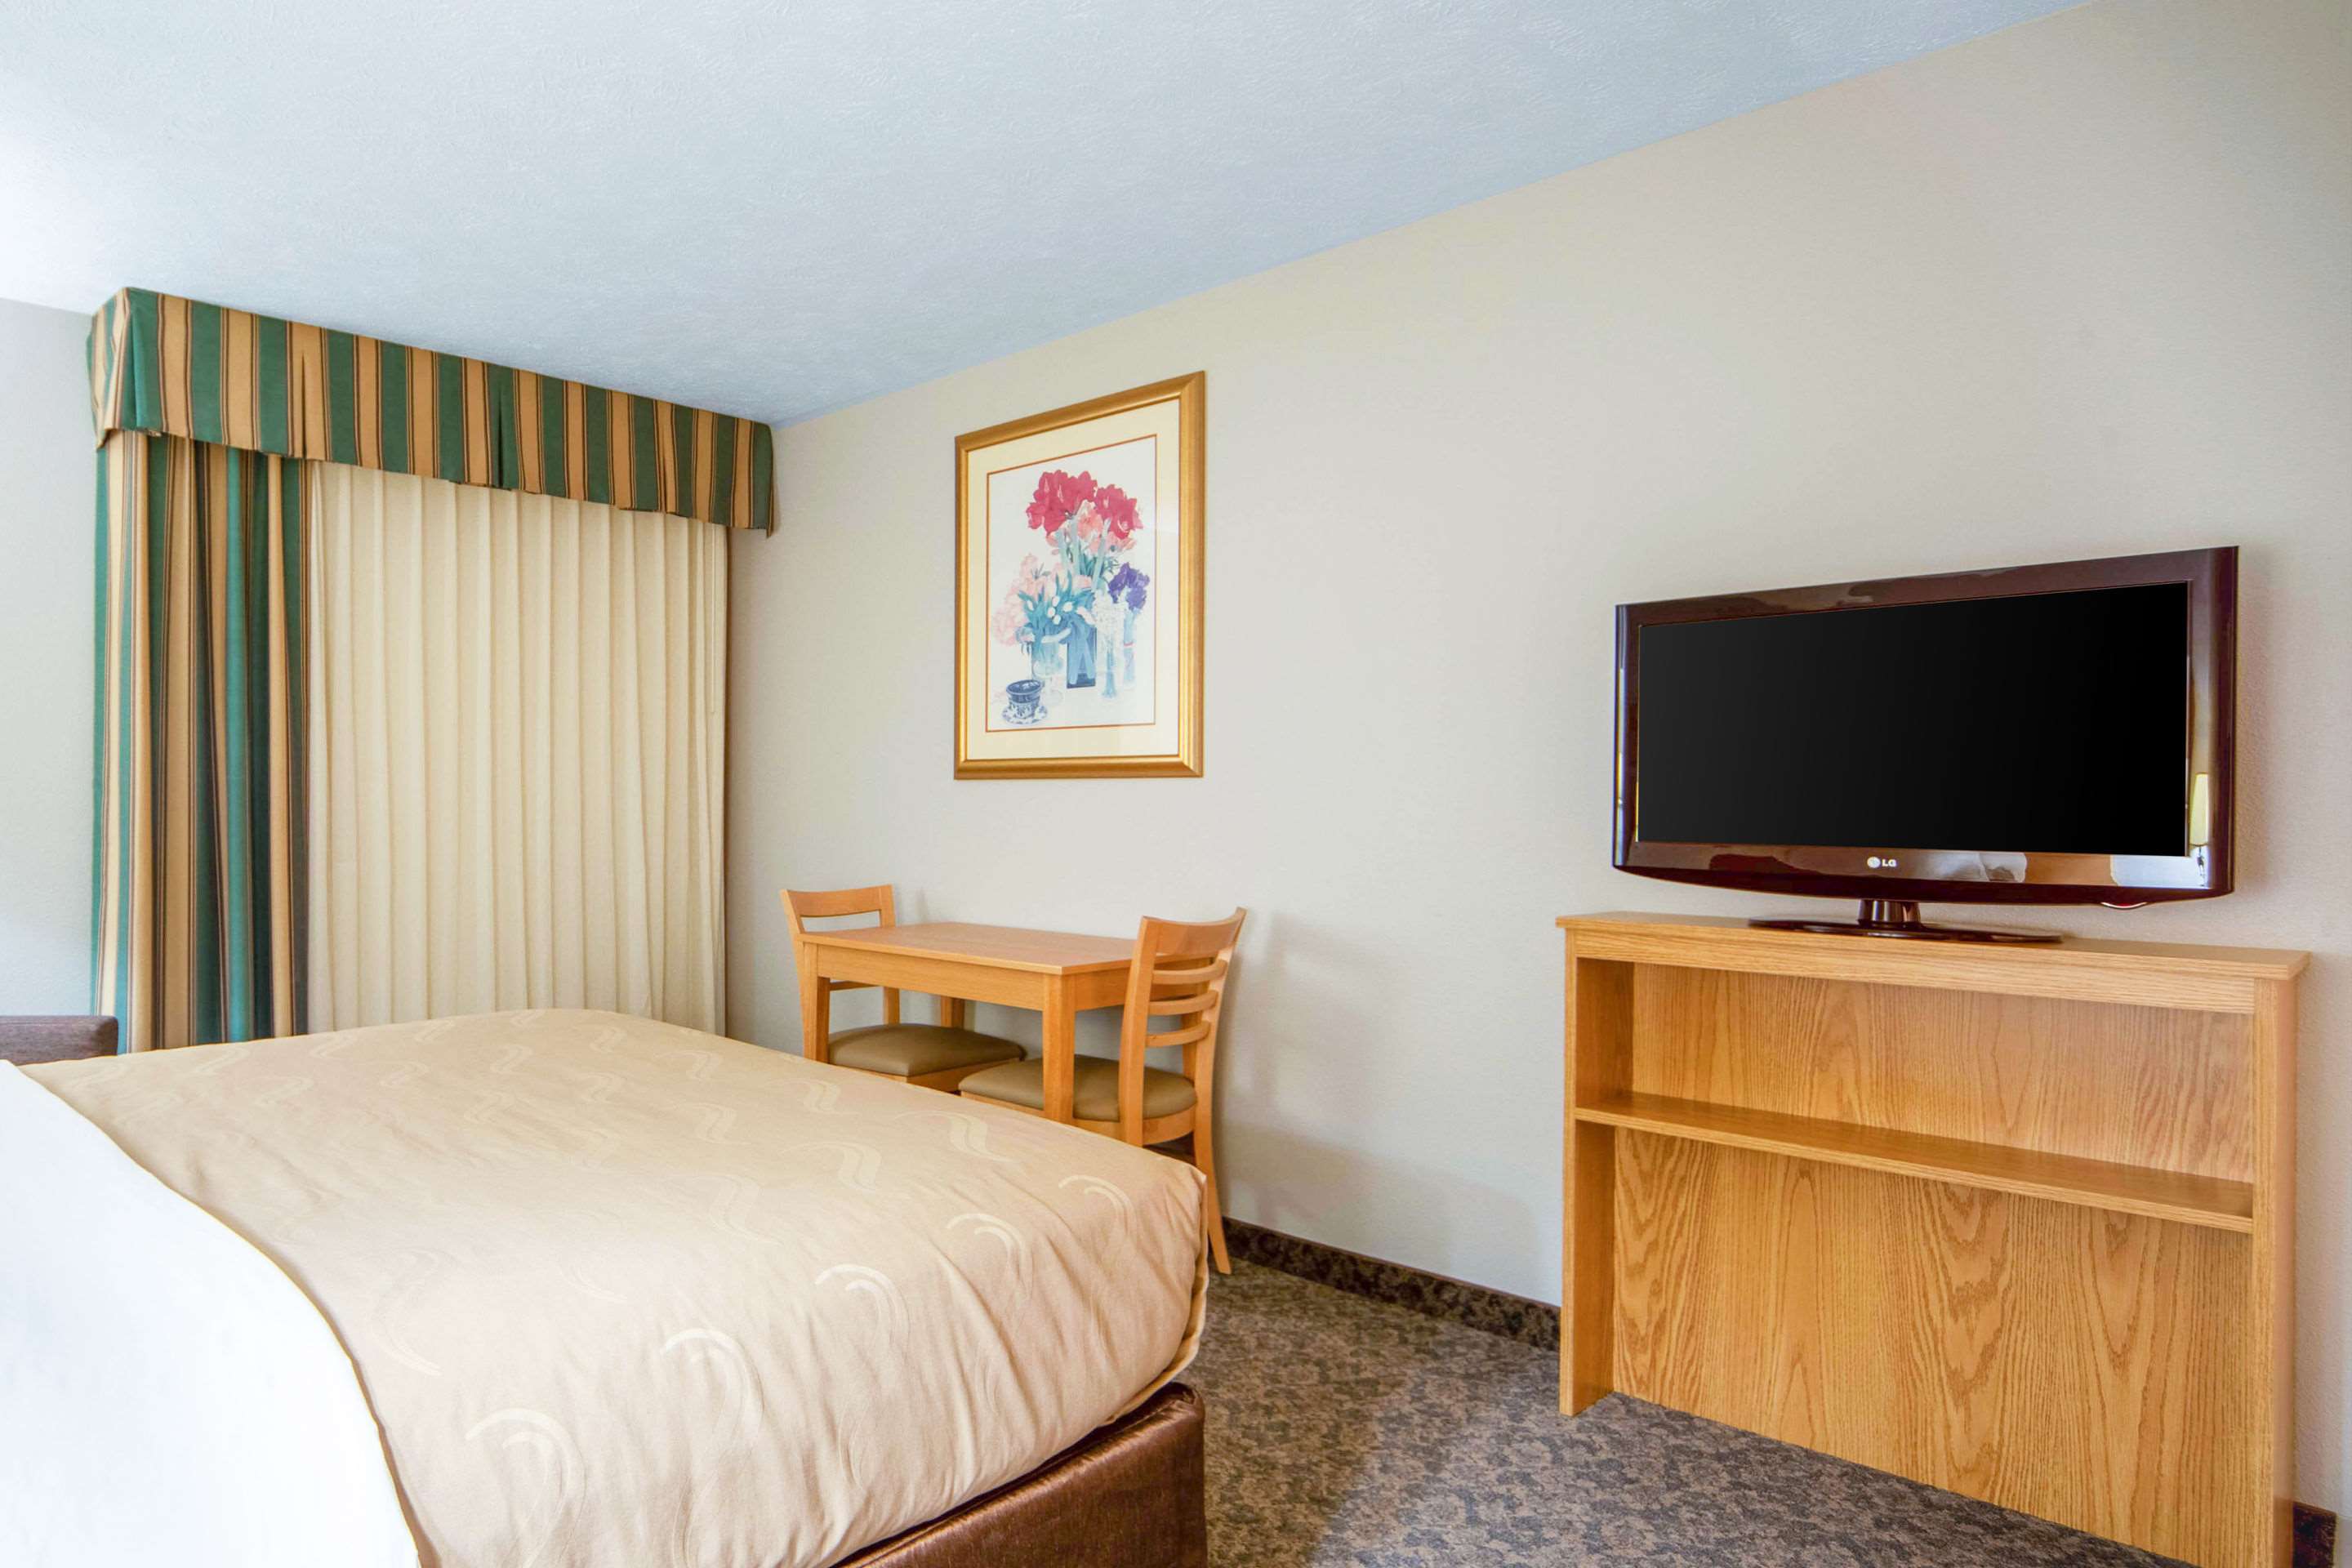 Suburban Extended Stay Hotel Photo